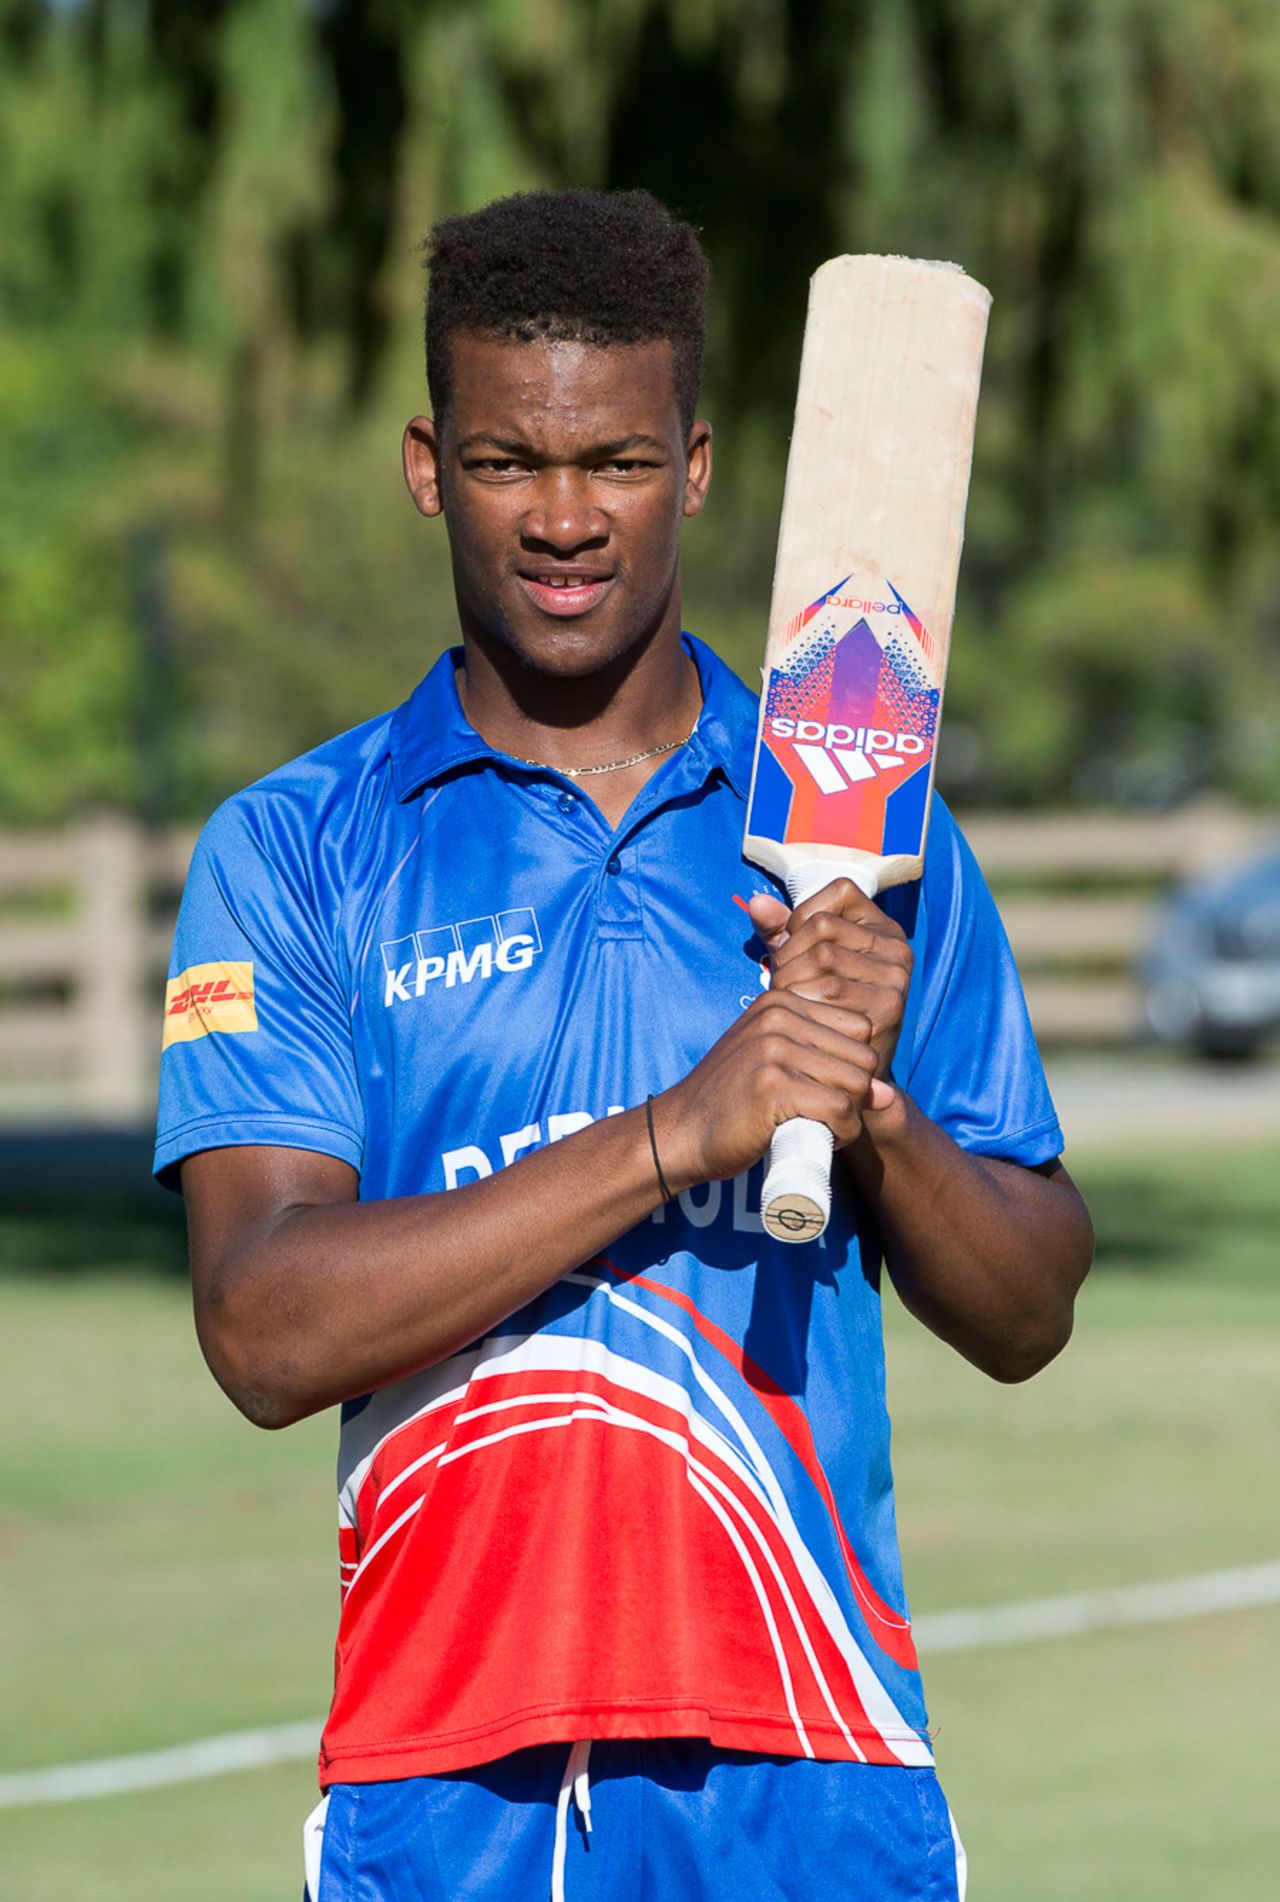 Delray Rawlins poses with his bat at Woodley Park, ICC World Cricket League Division Four, Los Angeles, November 1, 2016